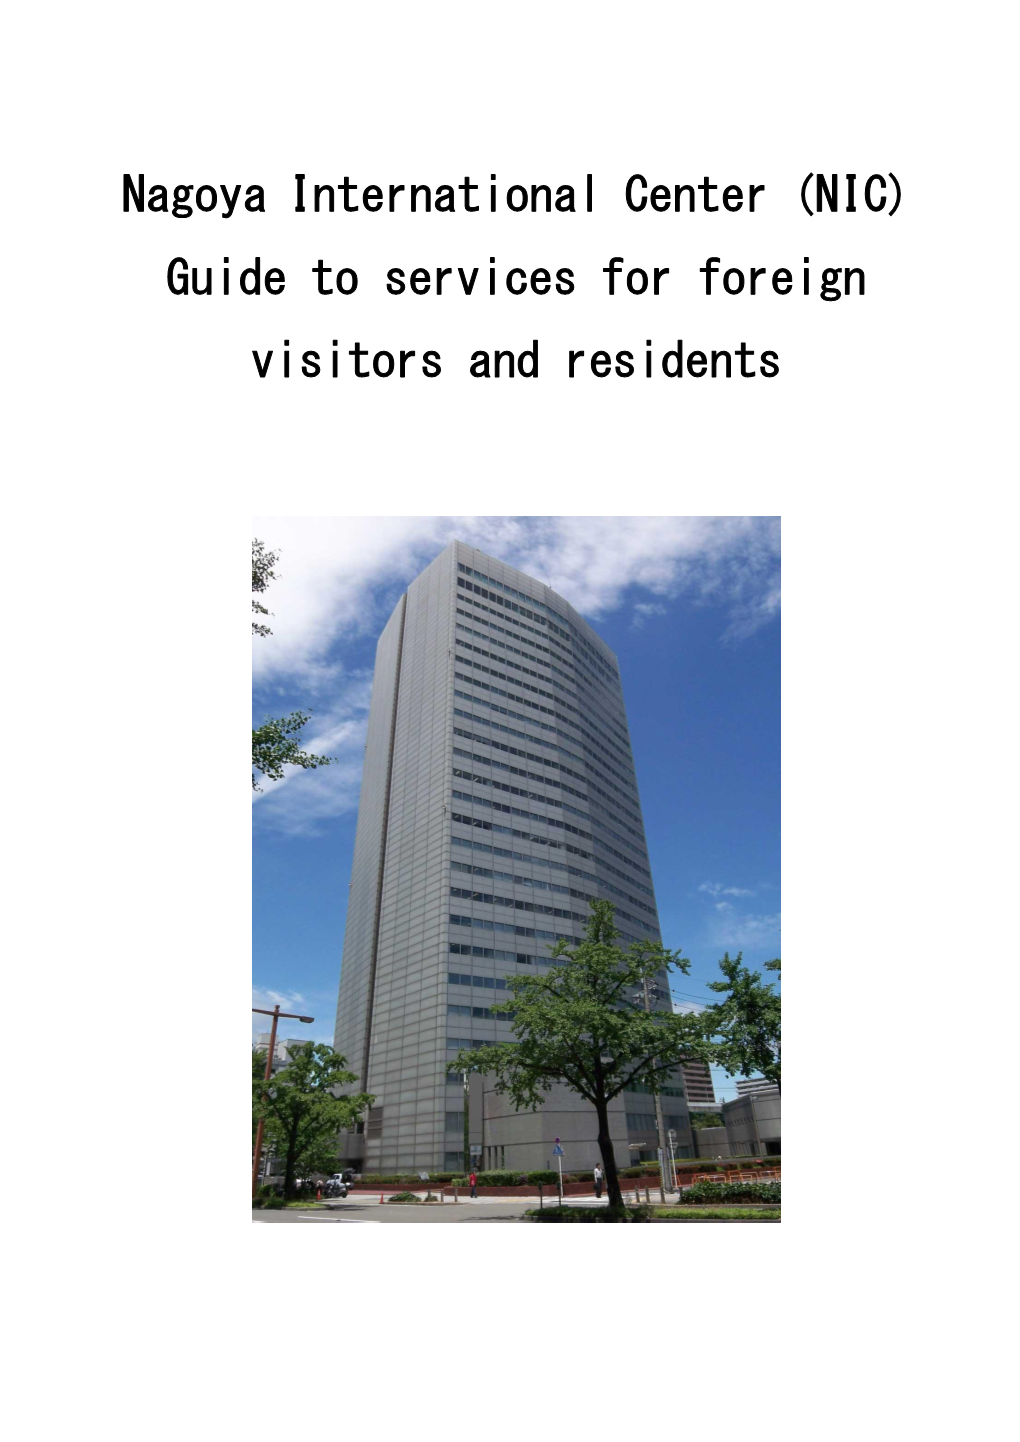 Nagoya International Center (NIC) Guide to Services for Foreign Visitors